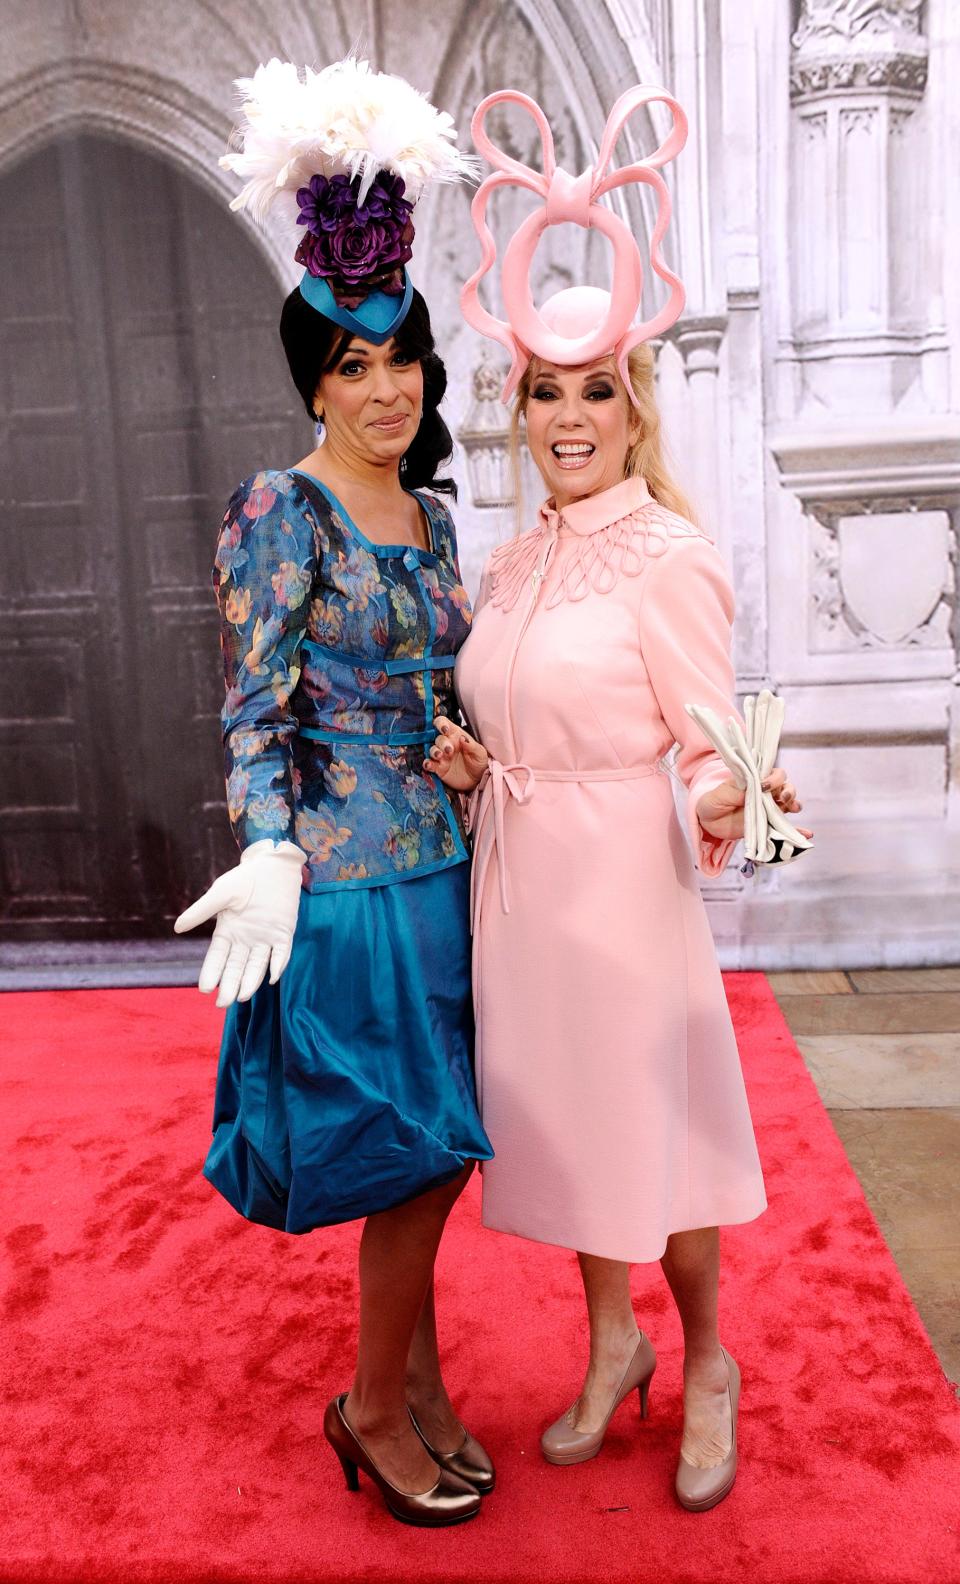 Like we said, morning TV hosts take Halloween <em>very</em> seriously. Just take one look at Kathie Lee Gifford and Hoda Kotb as royal wedding guests Princesses Beatrice and Eugenie back in 2011. Though their costume isn't the most timely pop-culture reference, it <em>is</em> fun. Wear your best dress and a fancy hat and you're all set.